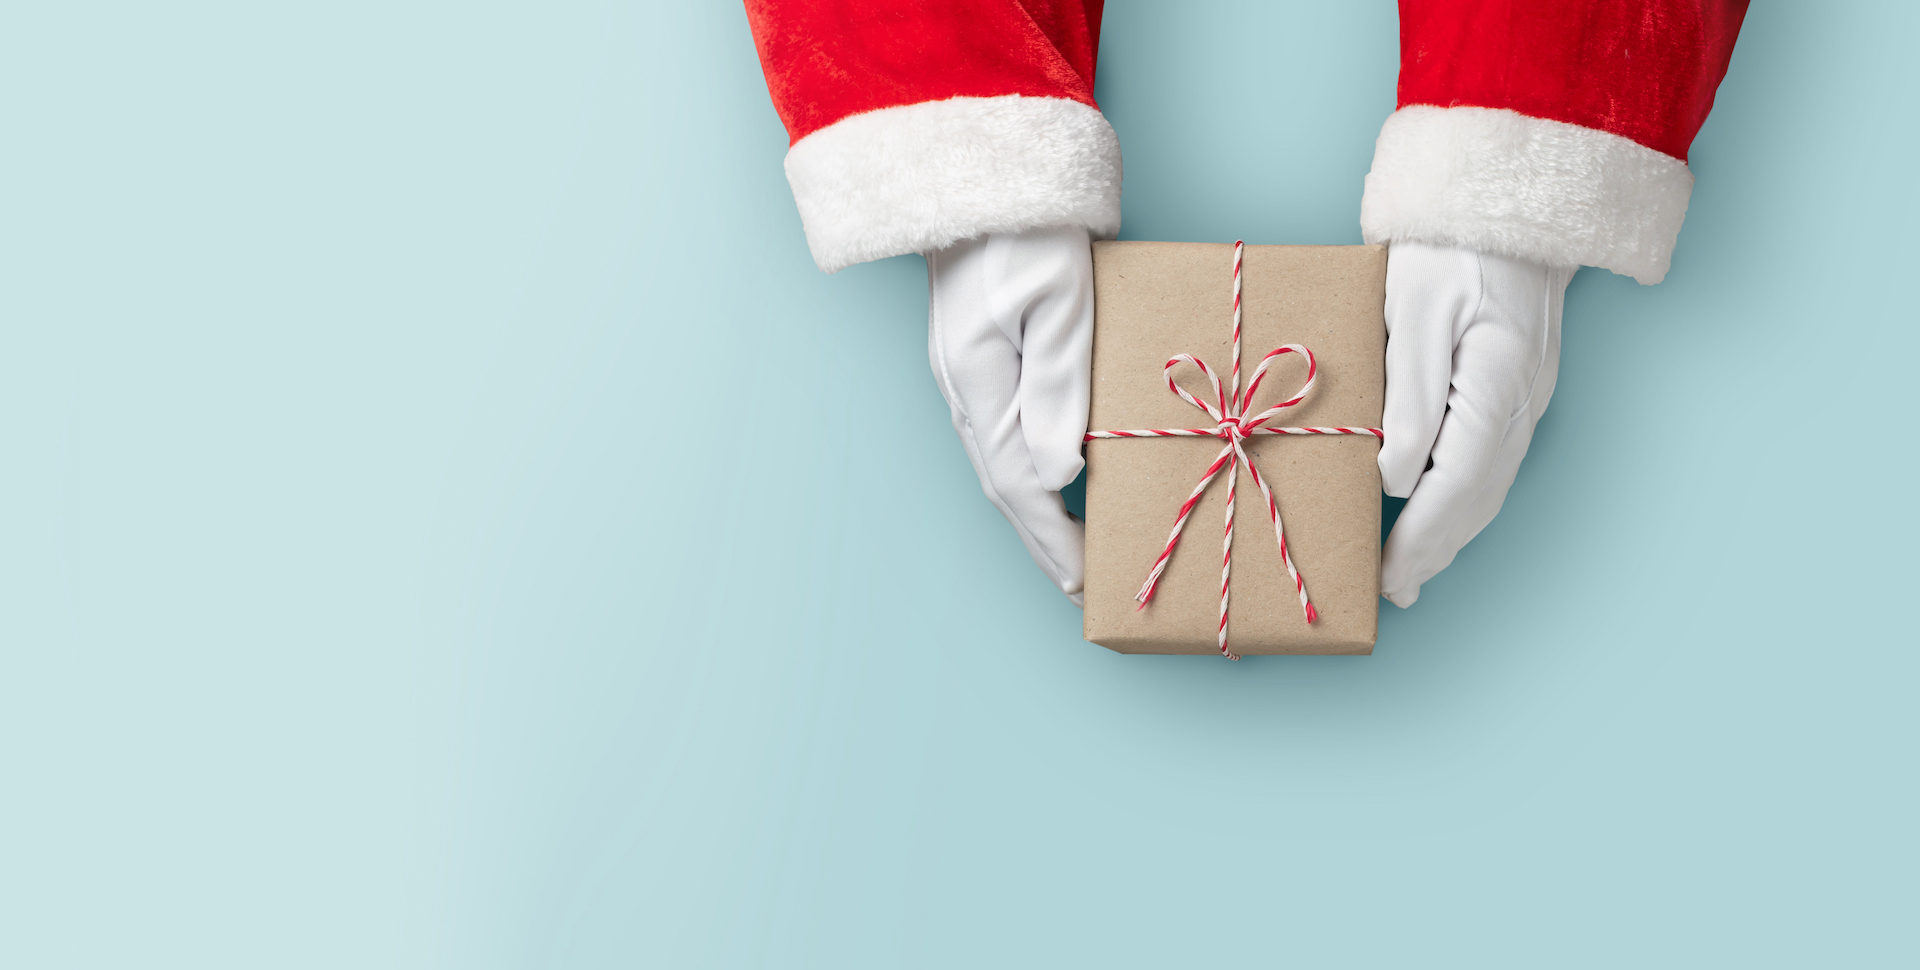 Top view of Santa claus hands is holding a brown gift box or present box over blue isolated background.